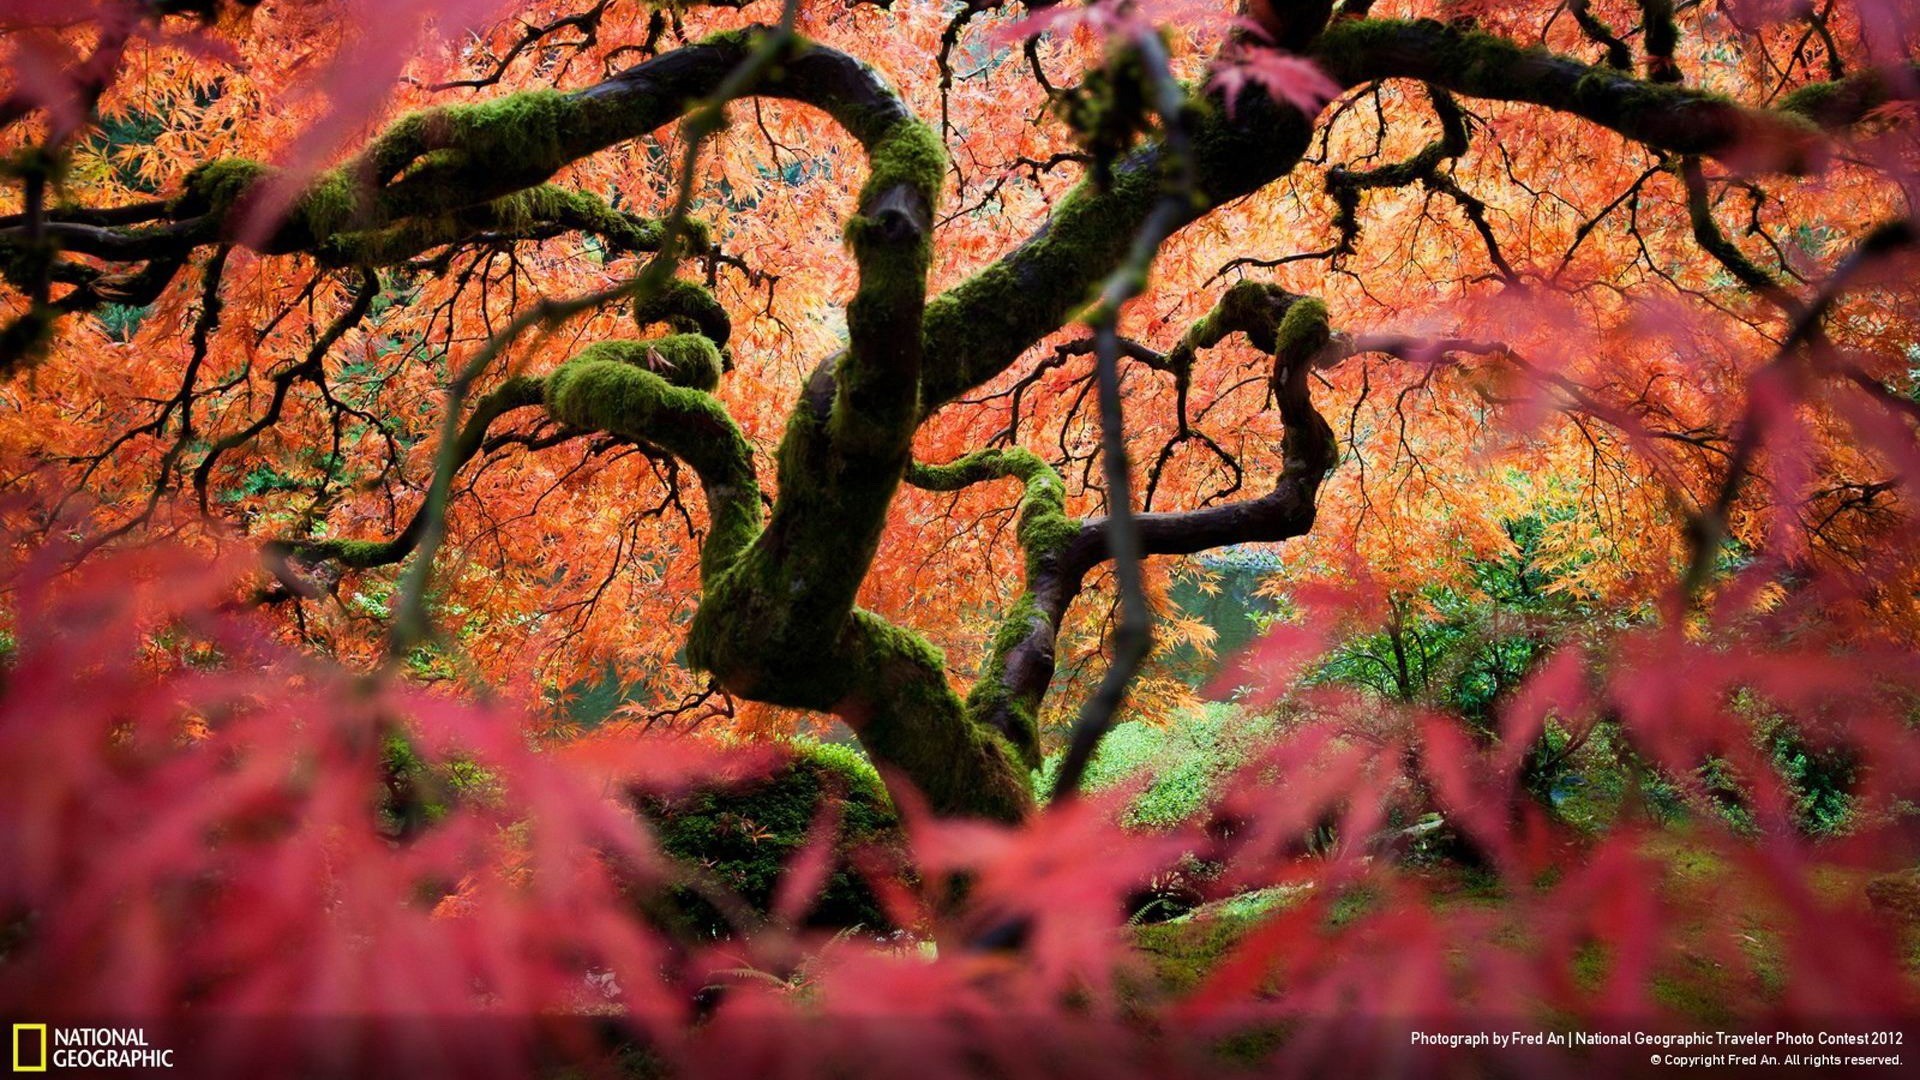 General 1920x1080 trees nature plants 2012 (Year) National Geographic